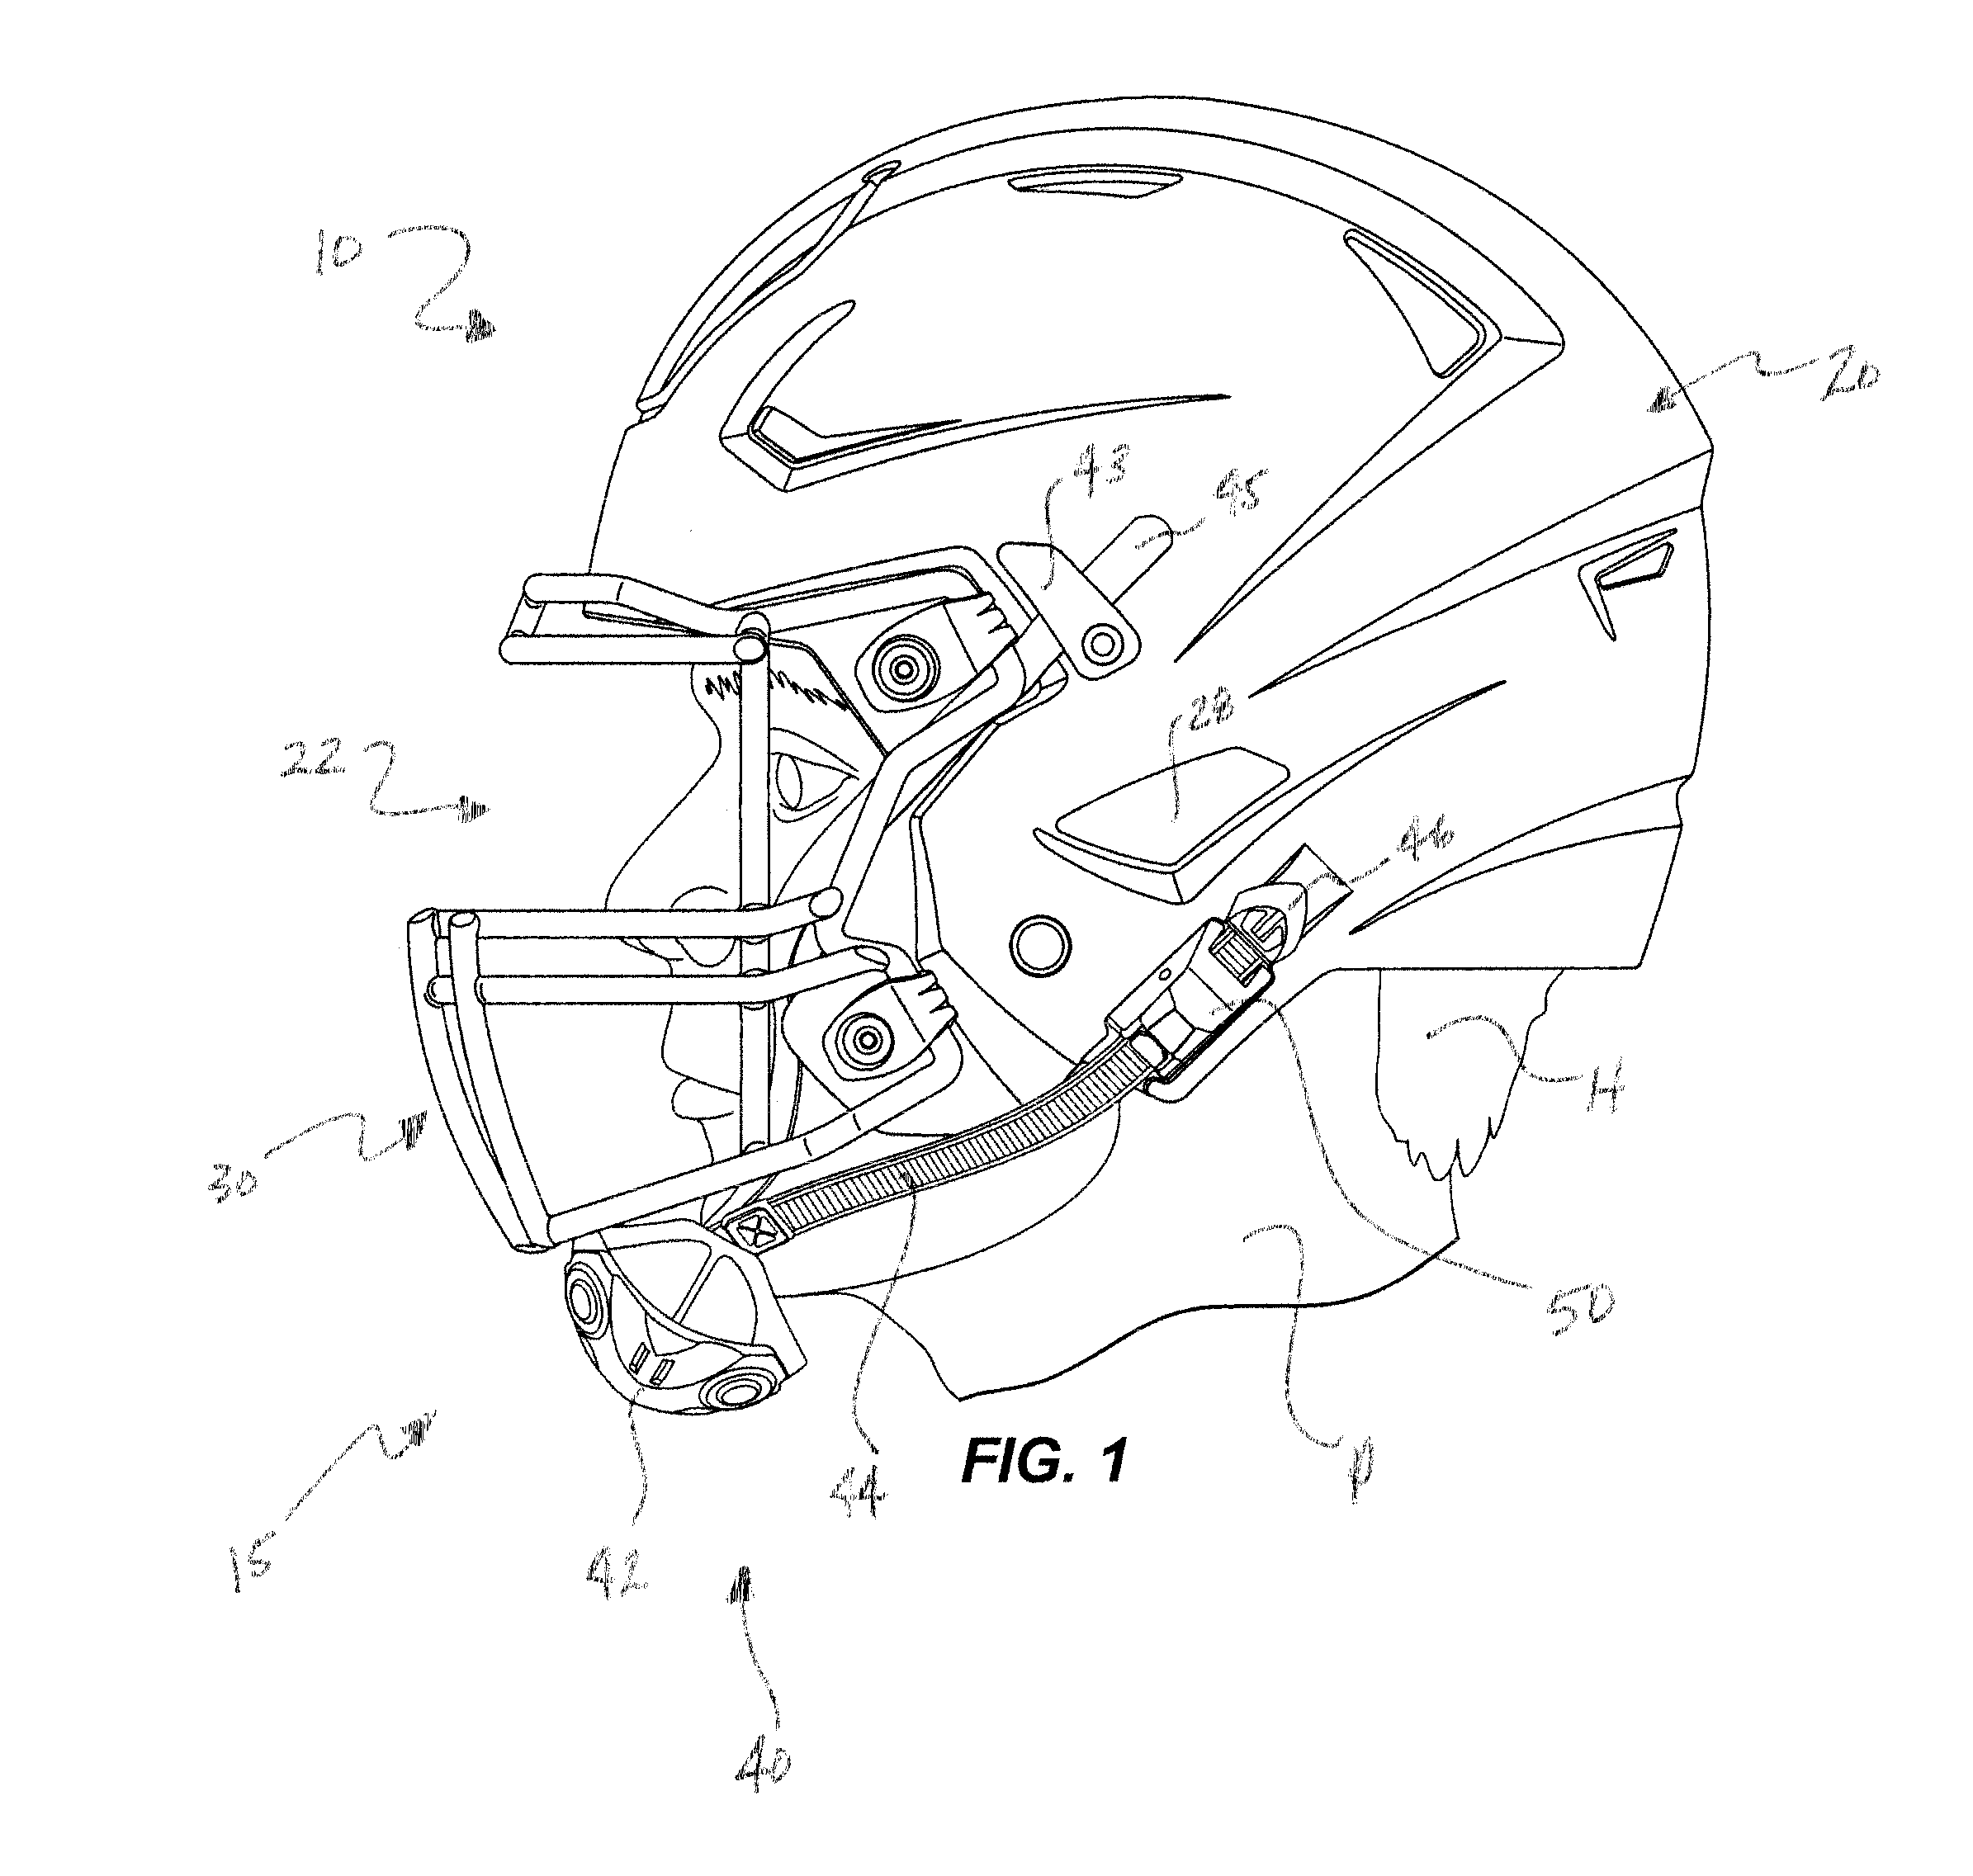 Sports helmet with adjustable chin strap system